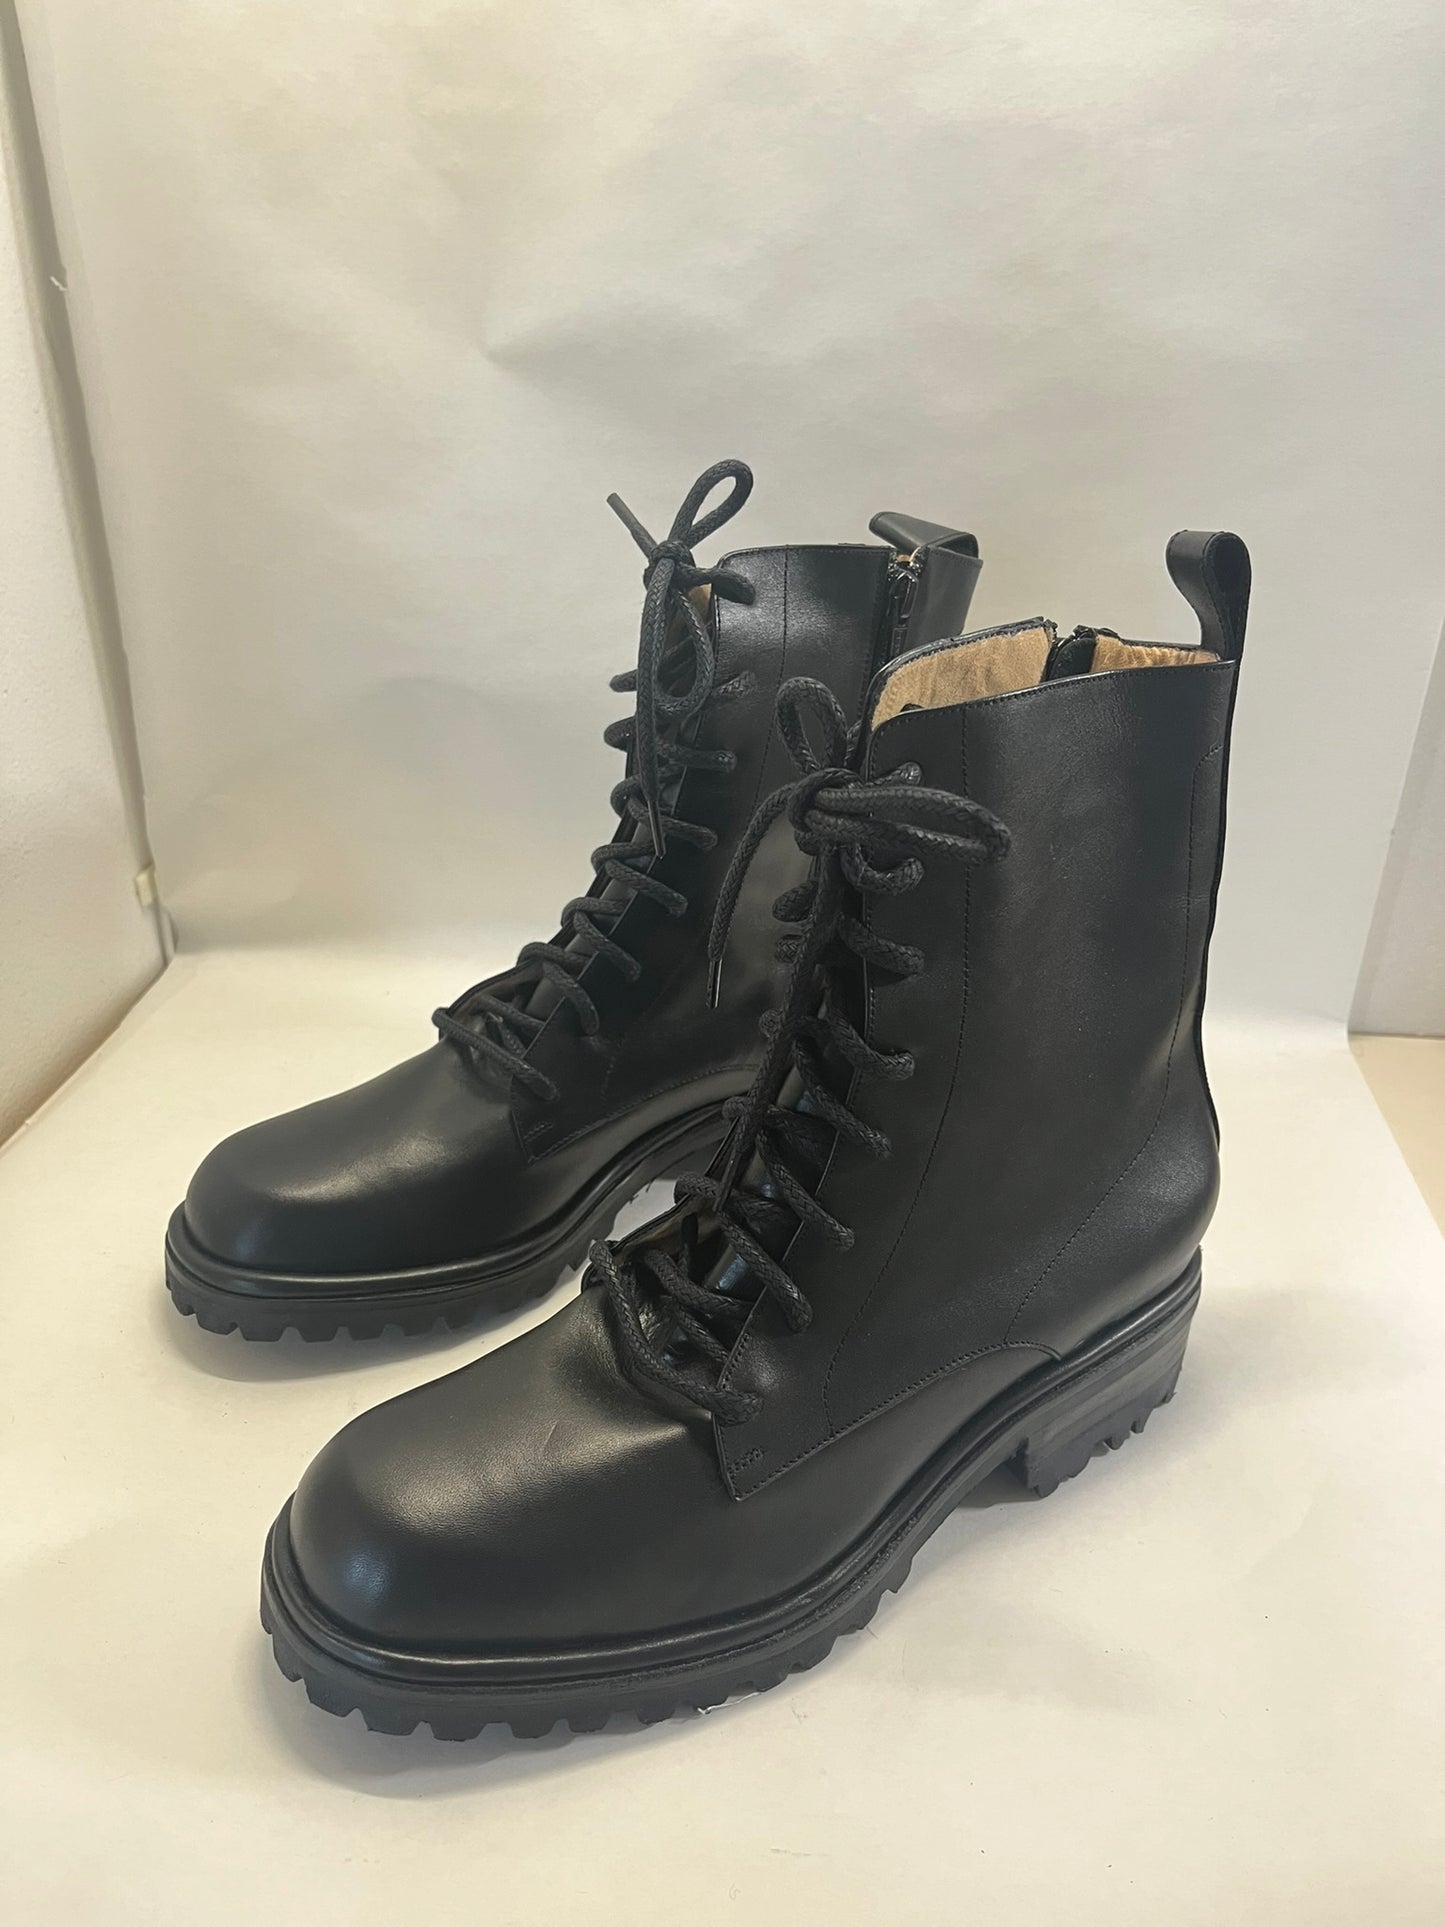 Low Roma Boot in Black Size 38